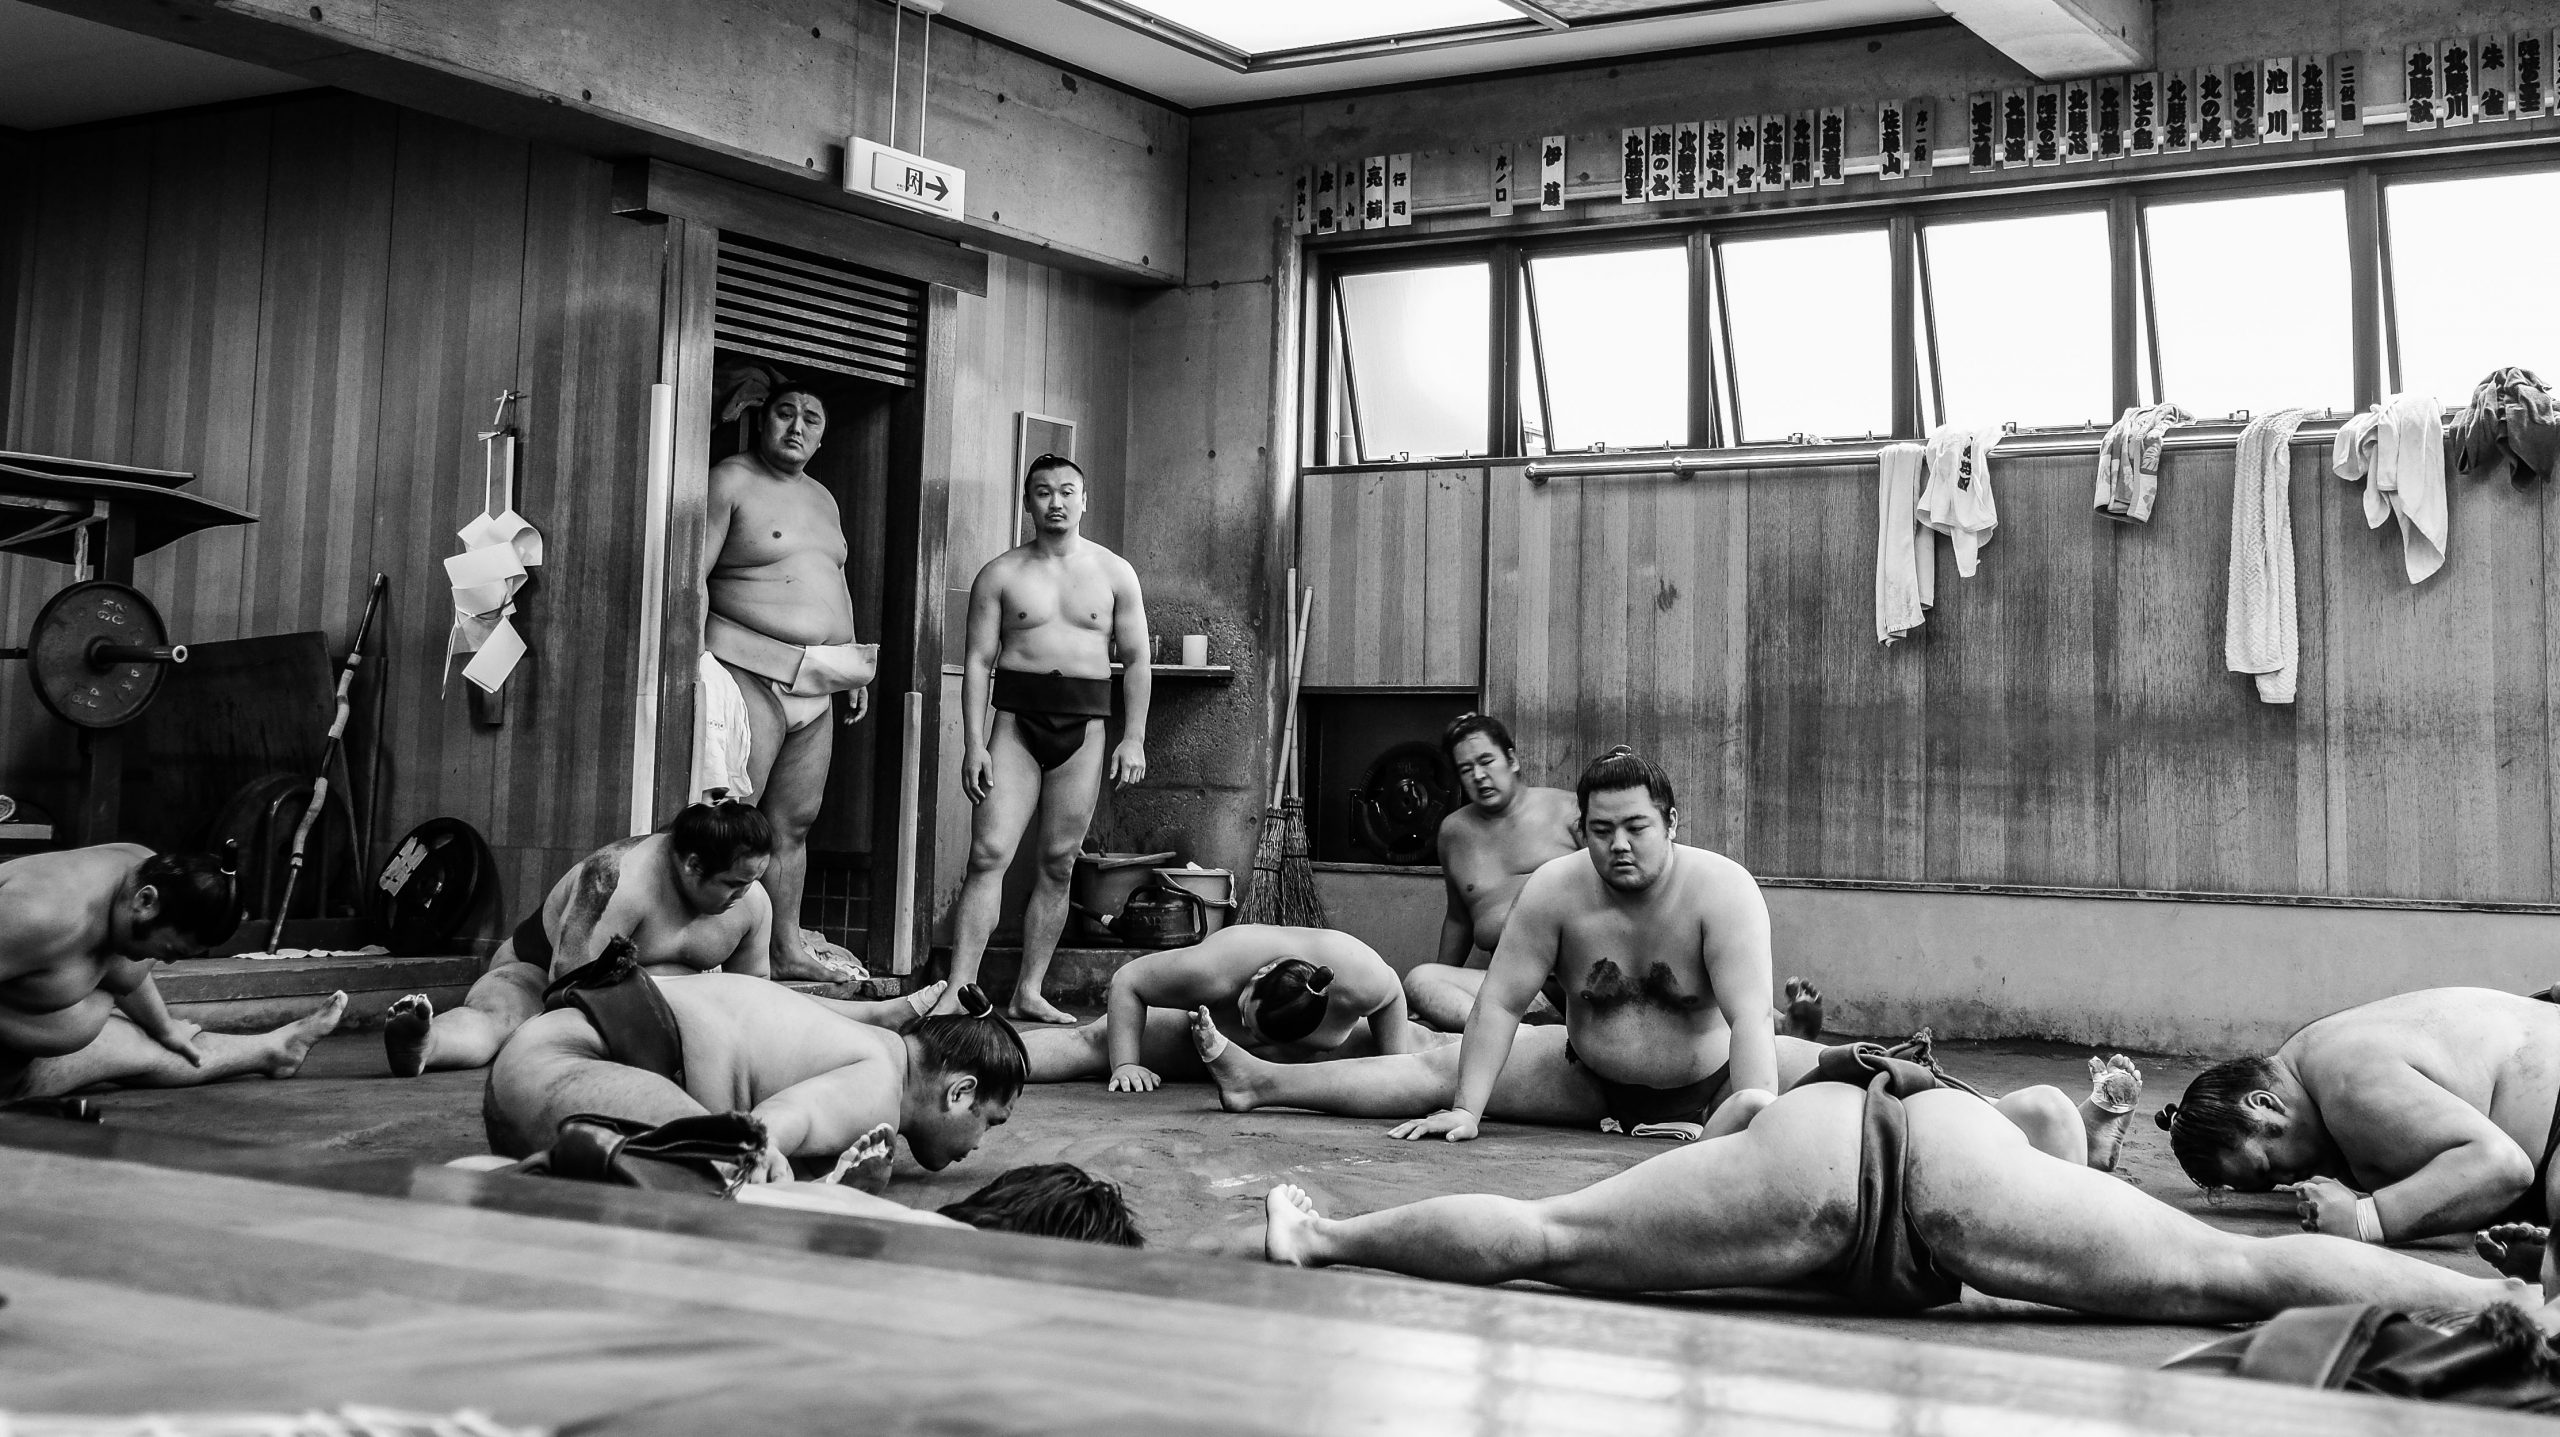 End of Sumo Practice